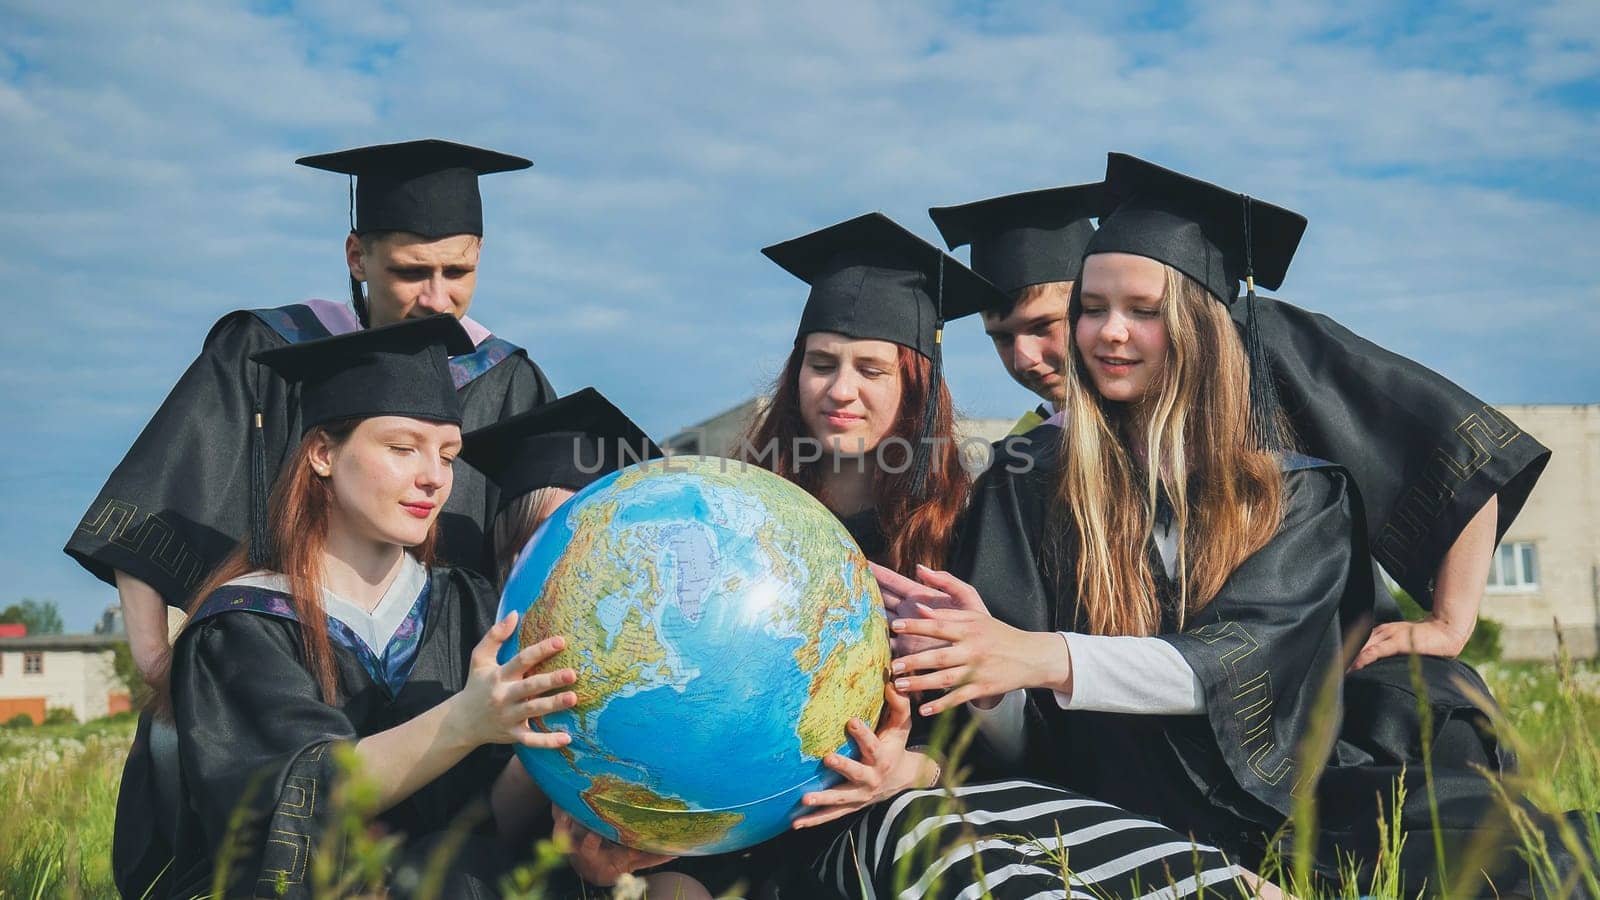 Graduates in black robes examine a geographical globe sitting on the grass. by DovidPro